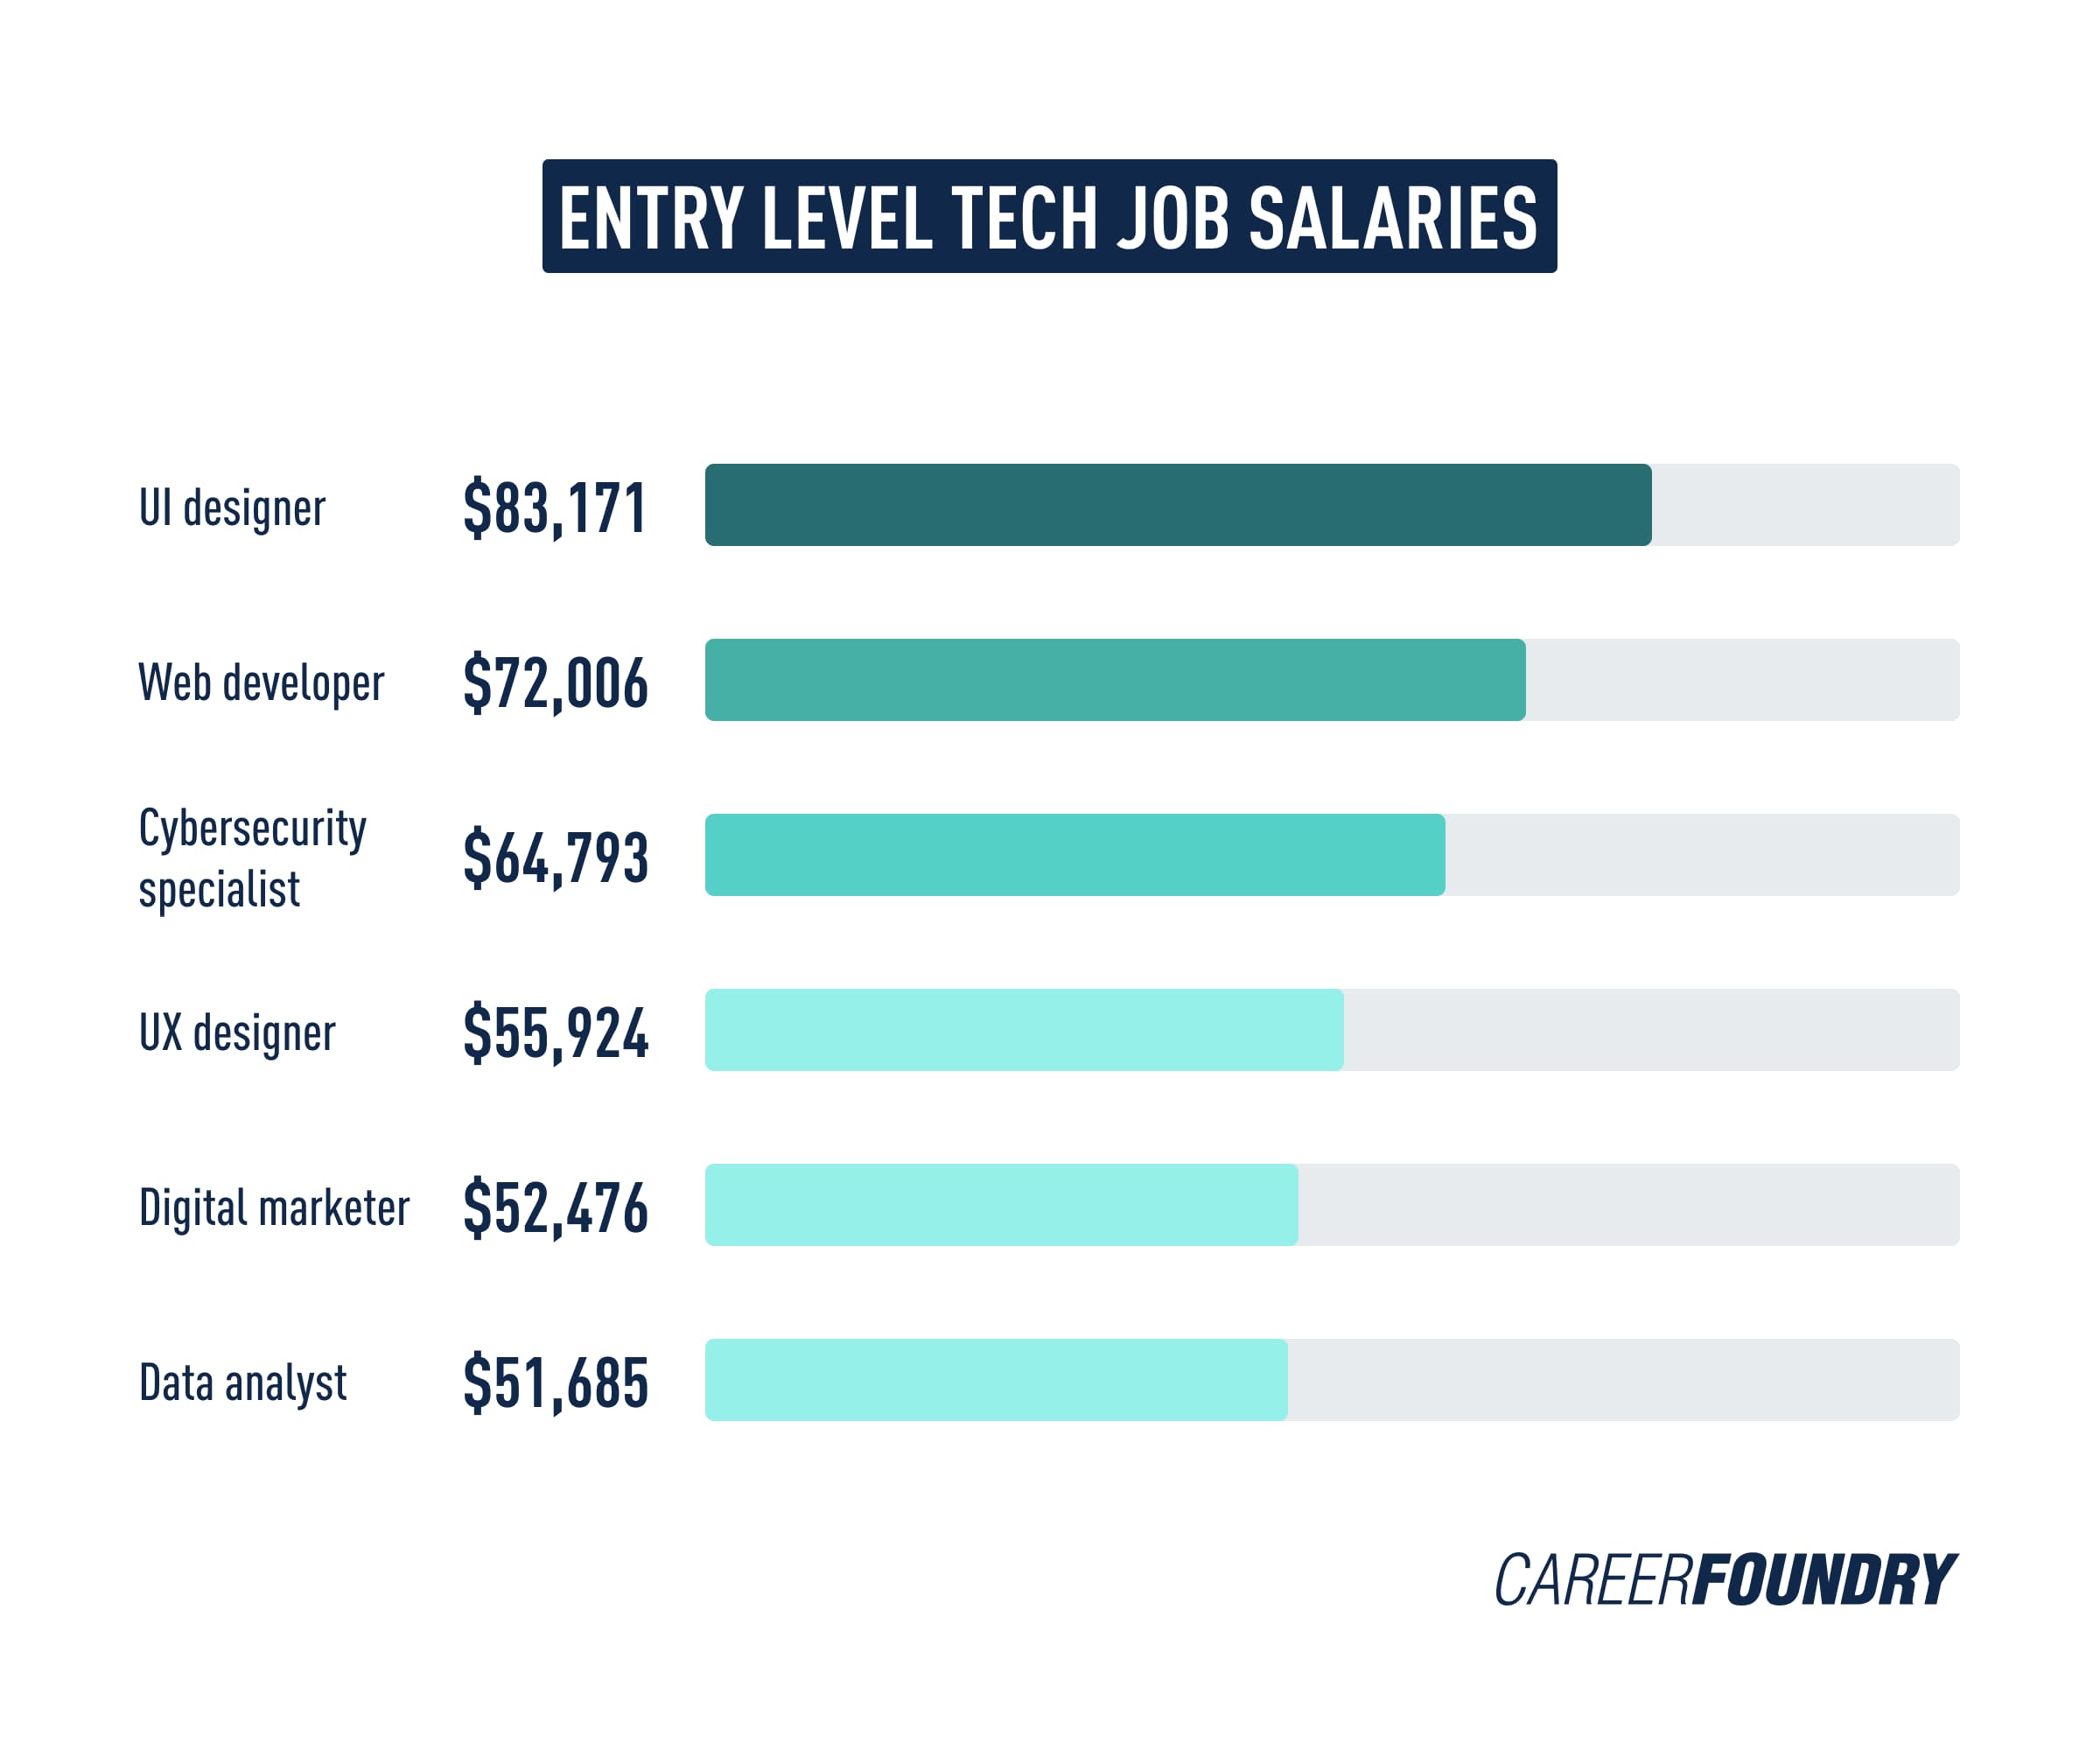 A graph showing the salaries for entry level tech jobs